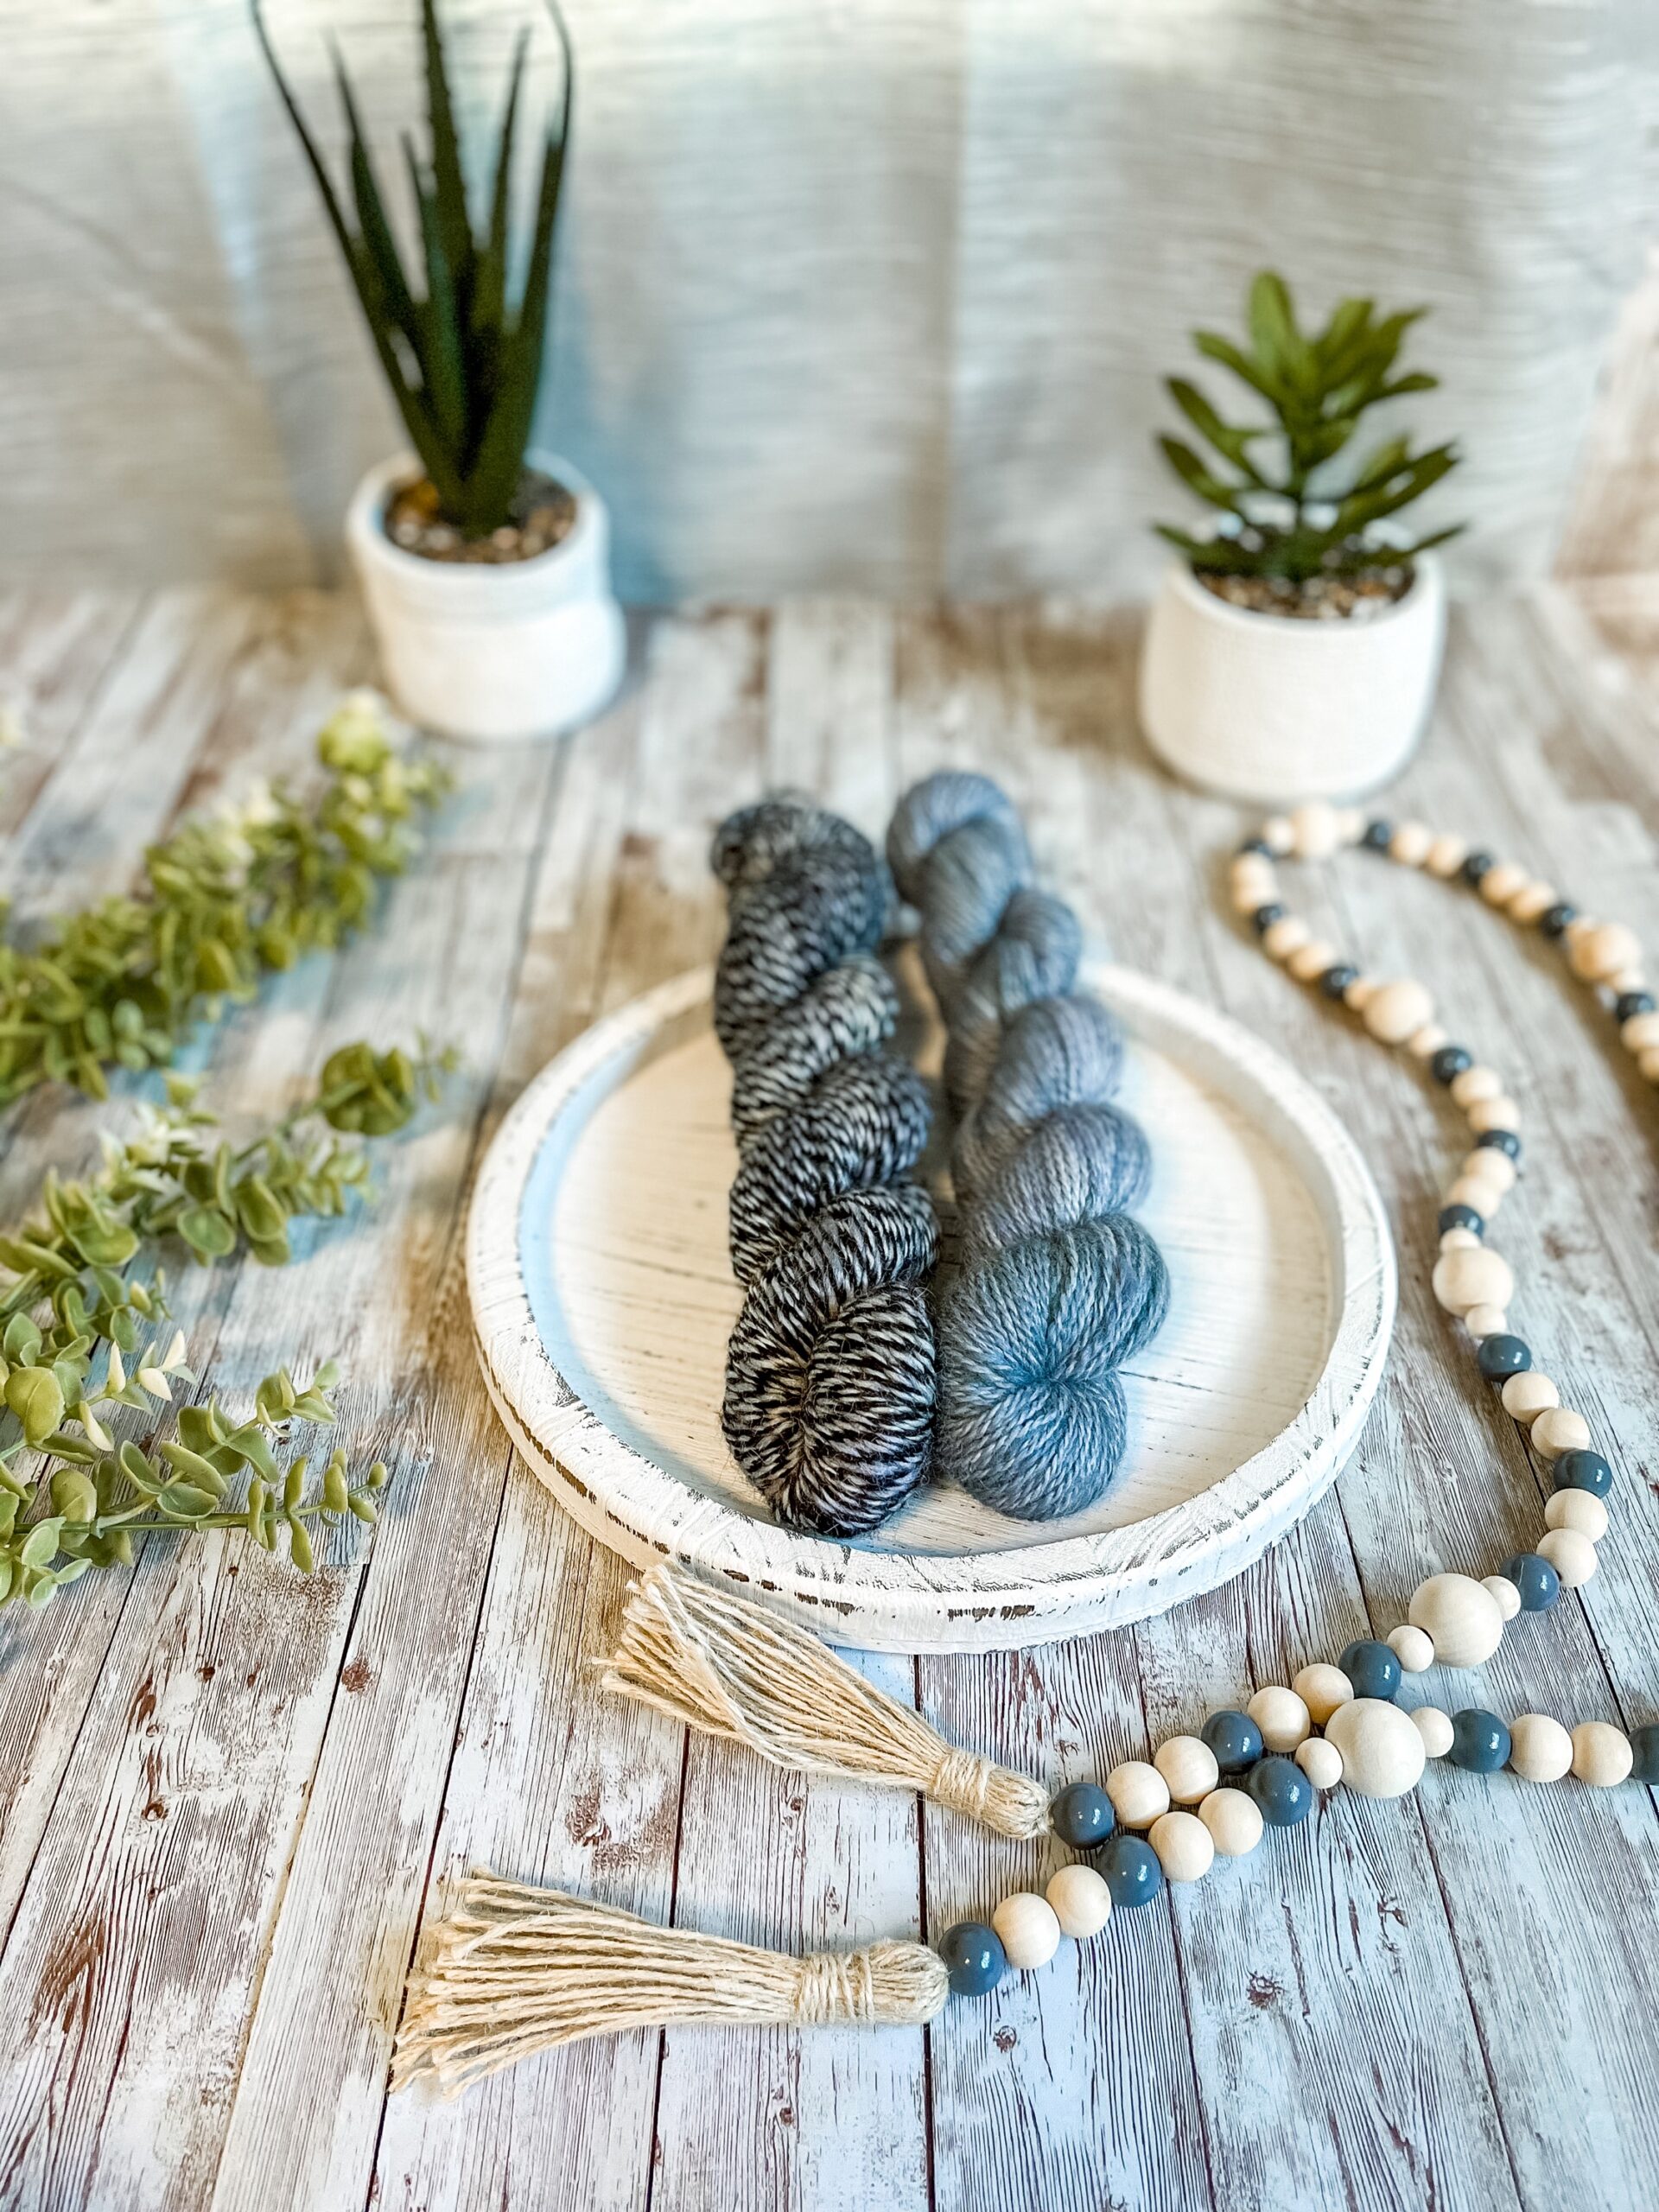 1 skein of hand-dyed, blue yarn and 1 twisted blue & black skein rest on a white wooden trivet. A strand of beads is draped to the right, some greenery is on the left, and 2 succulent plants are in the background.